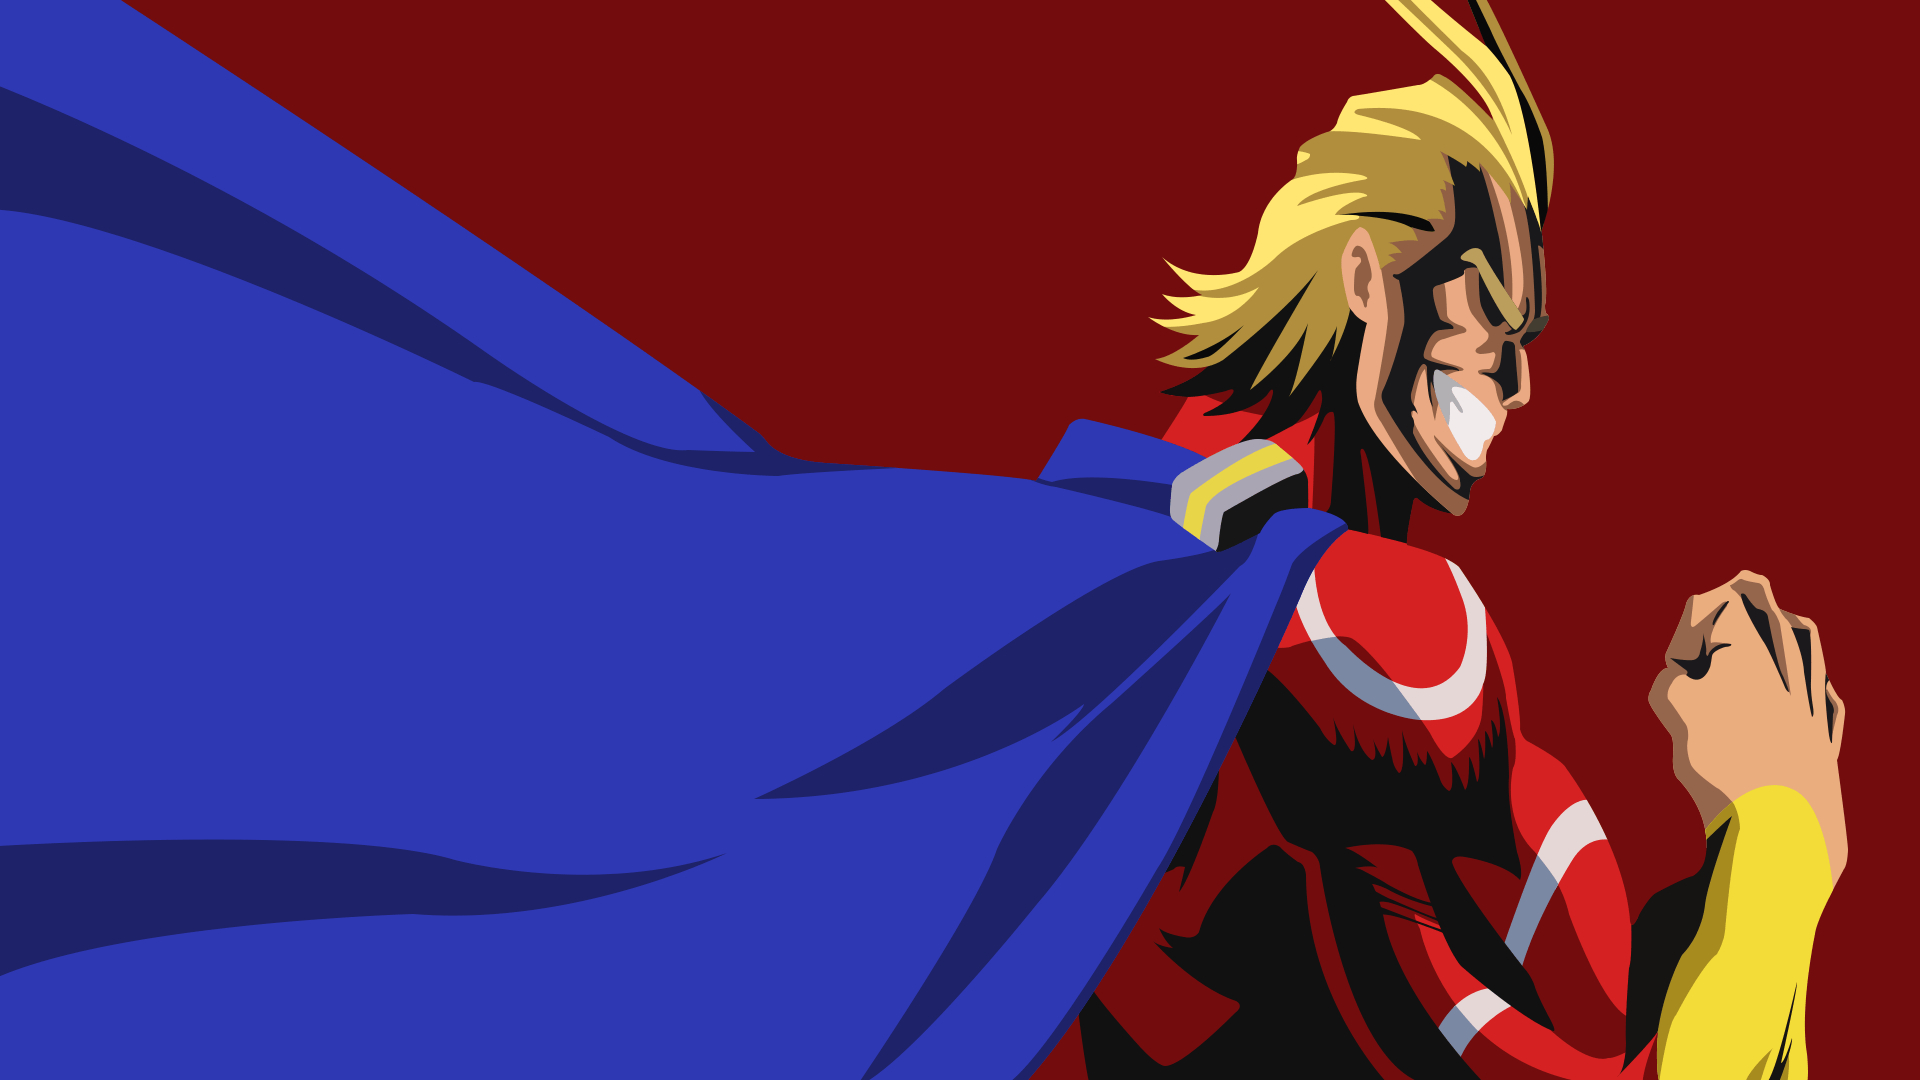 1920x1080 All Might My Hero Academia Wallpapers Top Free All Might My Hero Academia Backgrounds